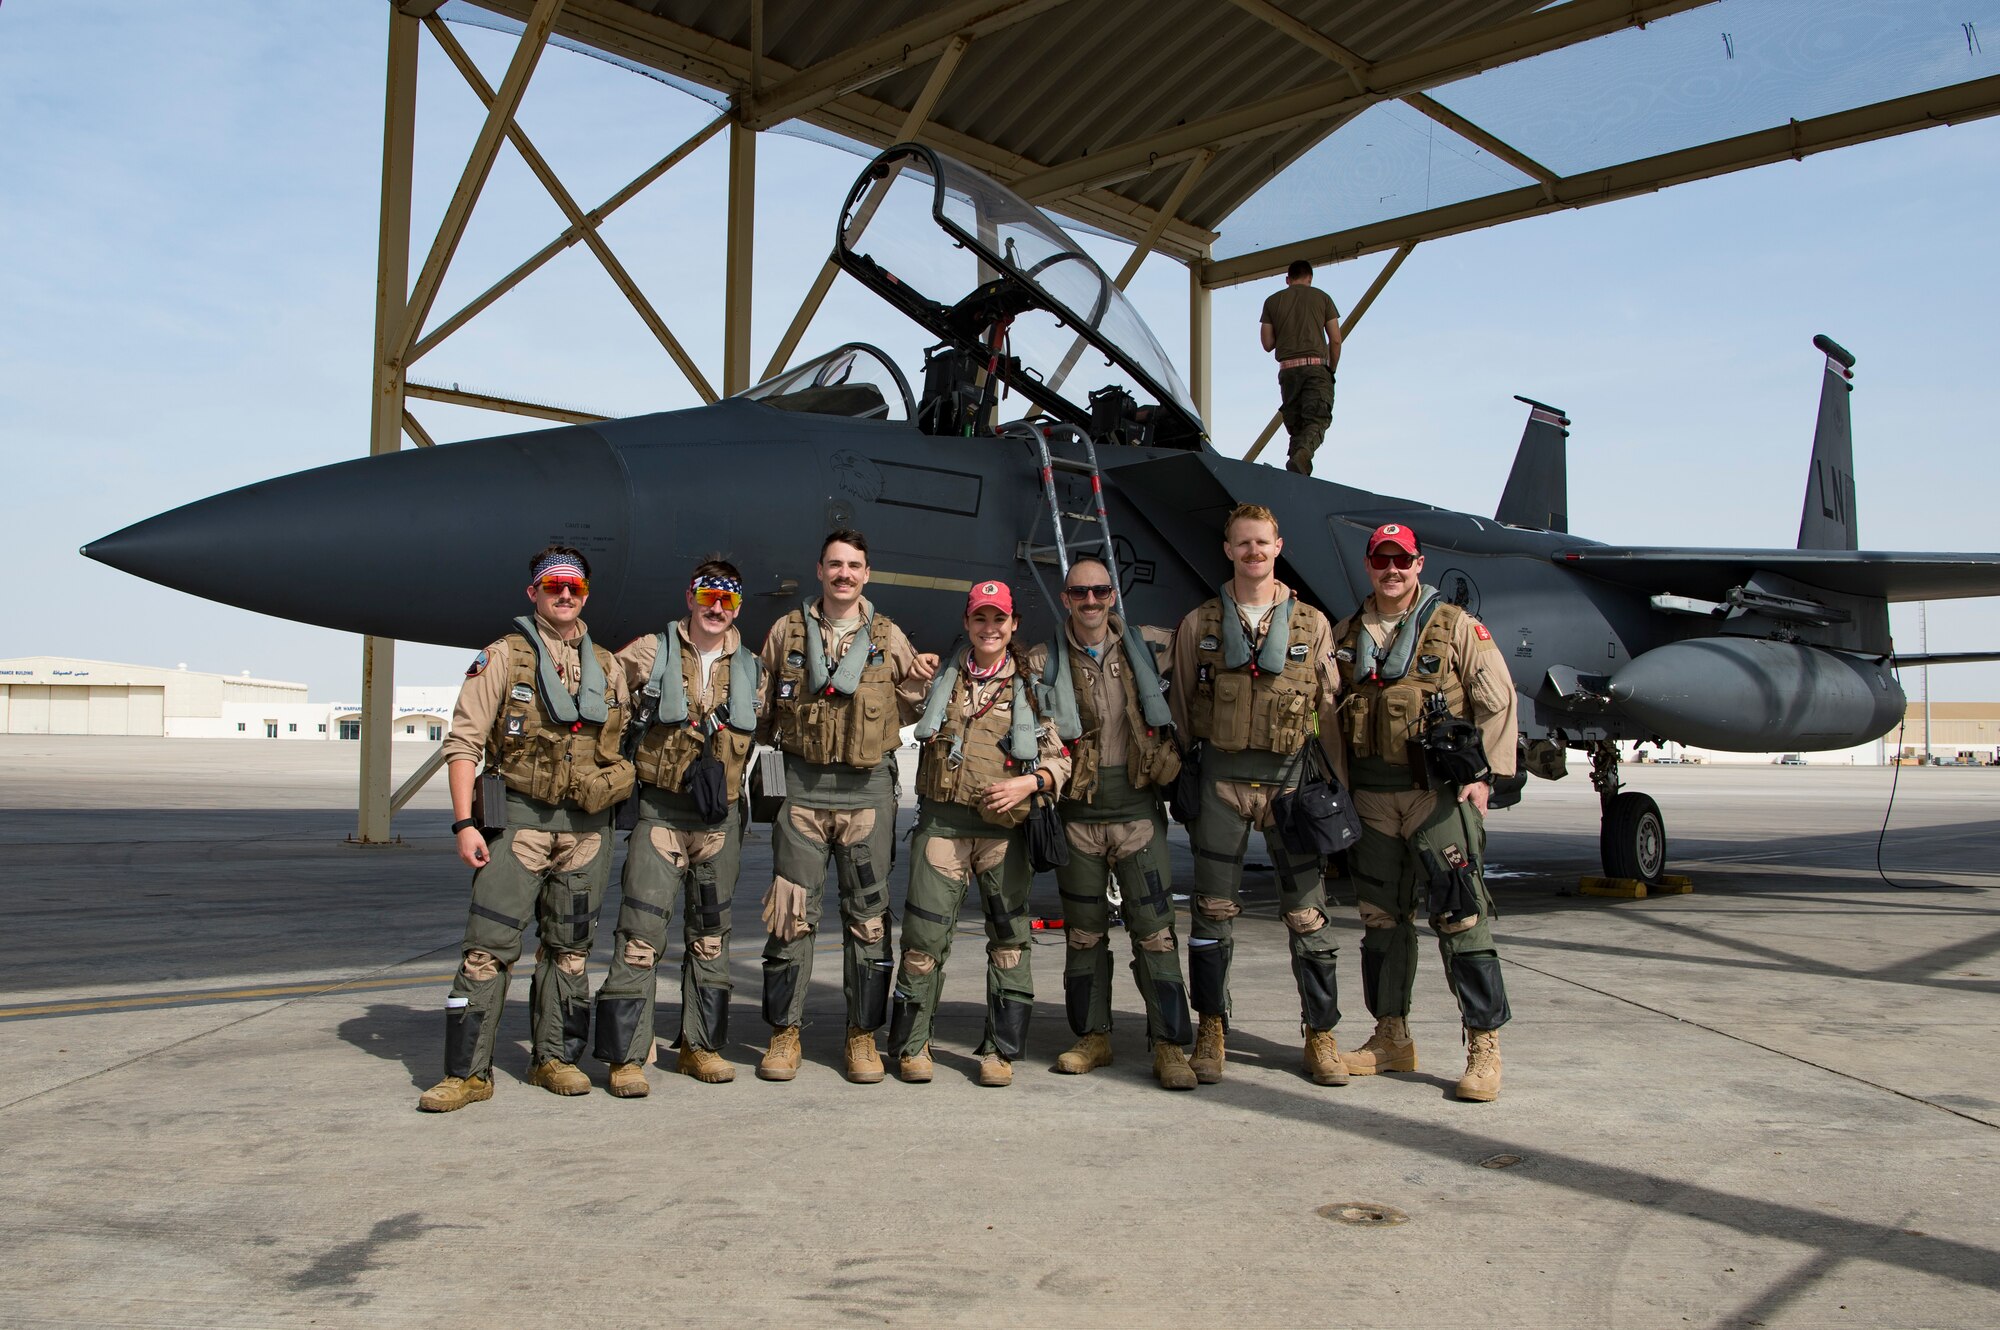 Aircrew with the 494th Expeditionary Fighter Squadron pose for a photo in front of an F-15E Strike Eagle, Al Dhafra Air Base, United Arab Emirates, after conducting a fly-by honoring Qatar National Day, Dec. 18, 2019.